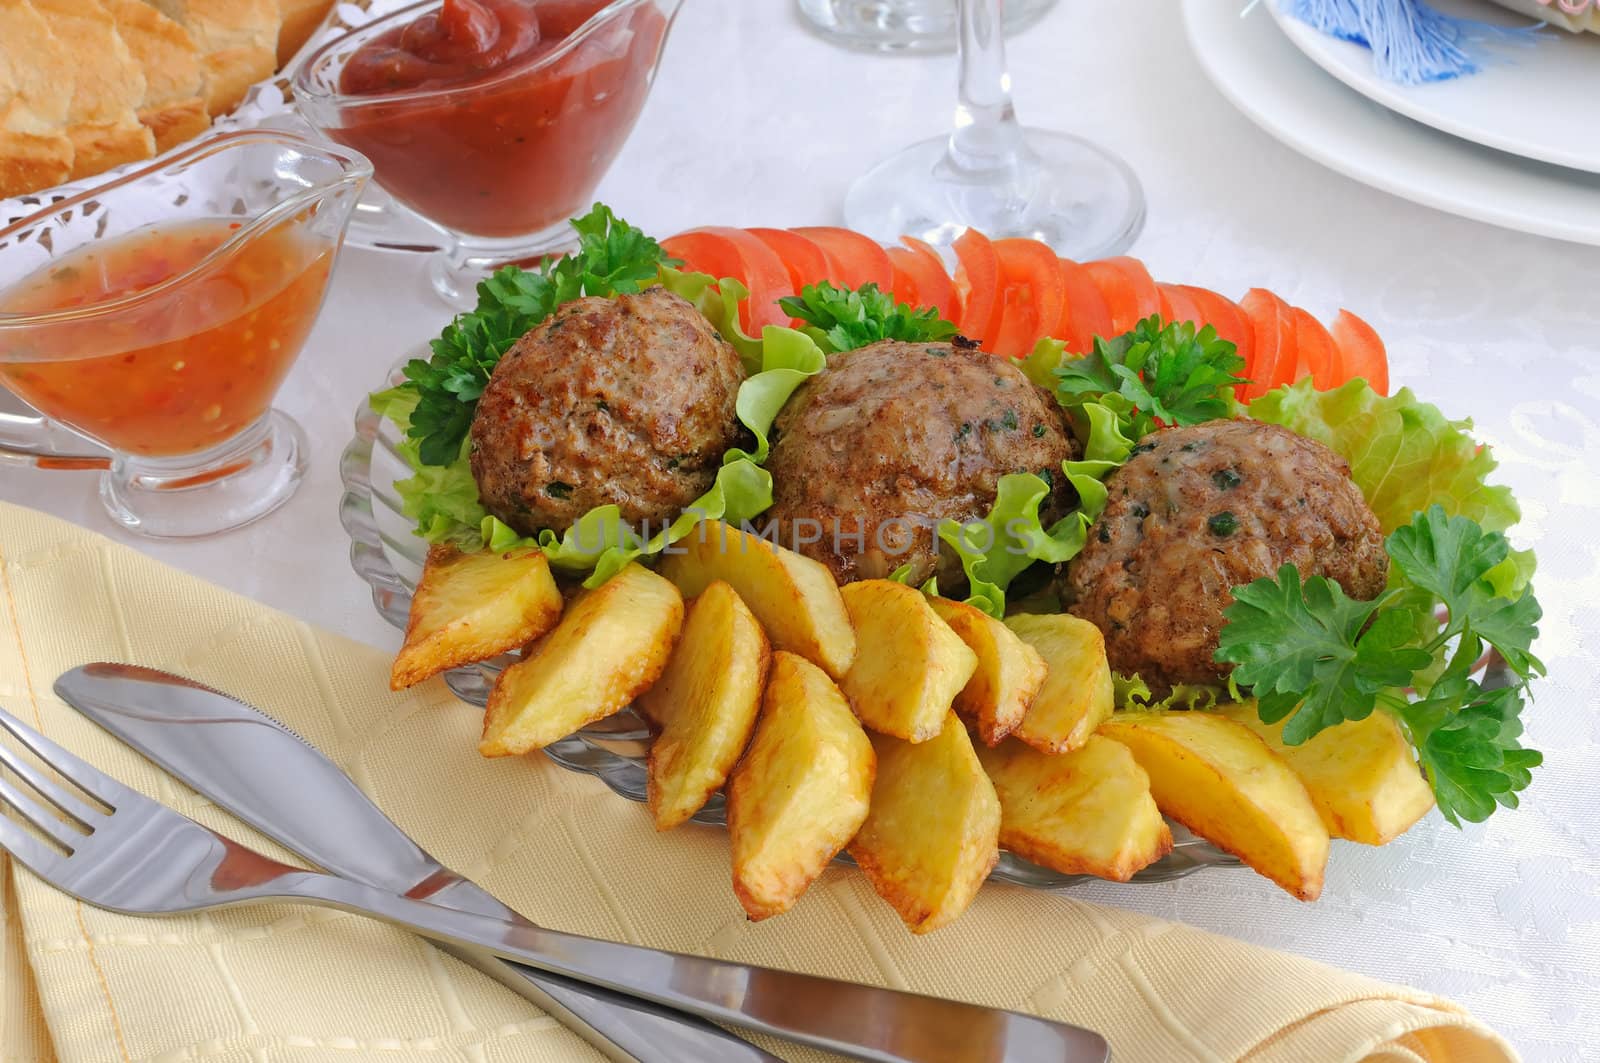 Meatballs with herbs and potatoes by Apolonia